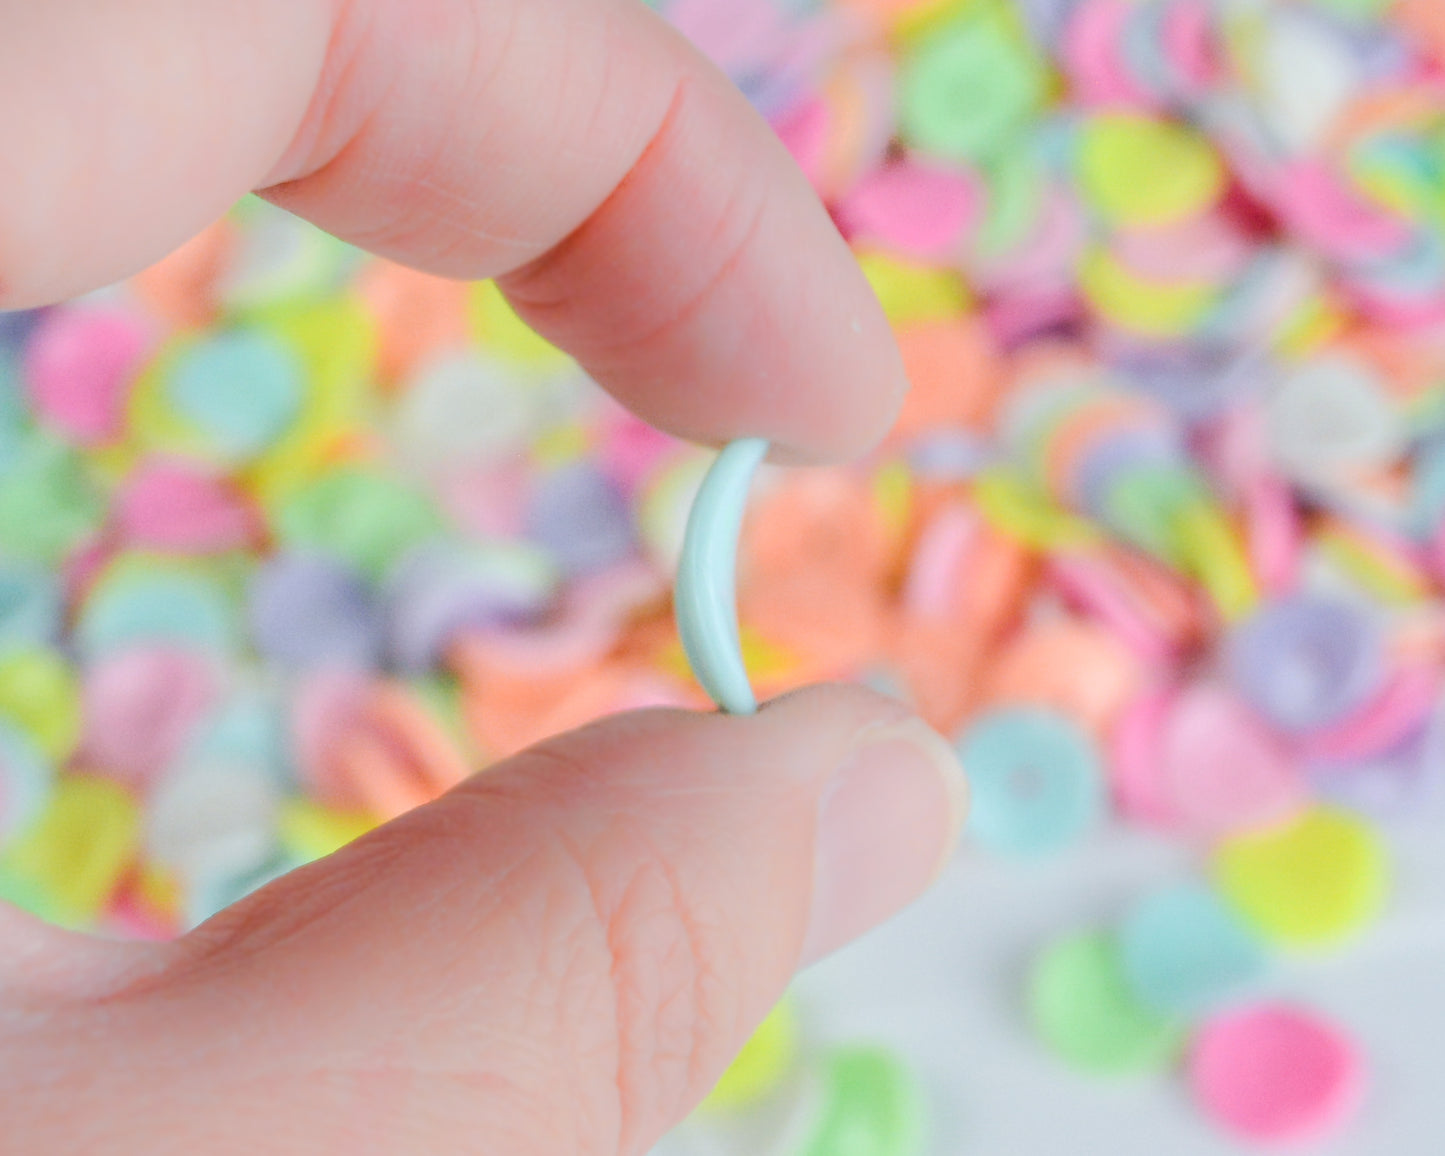 15x5mm Wavy Disc Beads in Pastel Colored Acrylic